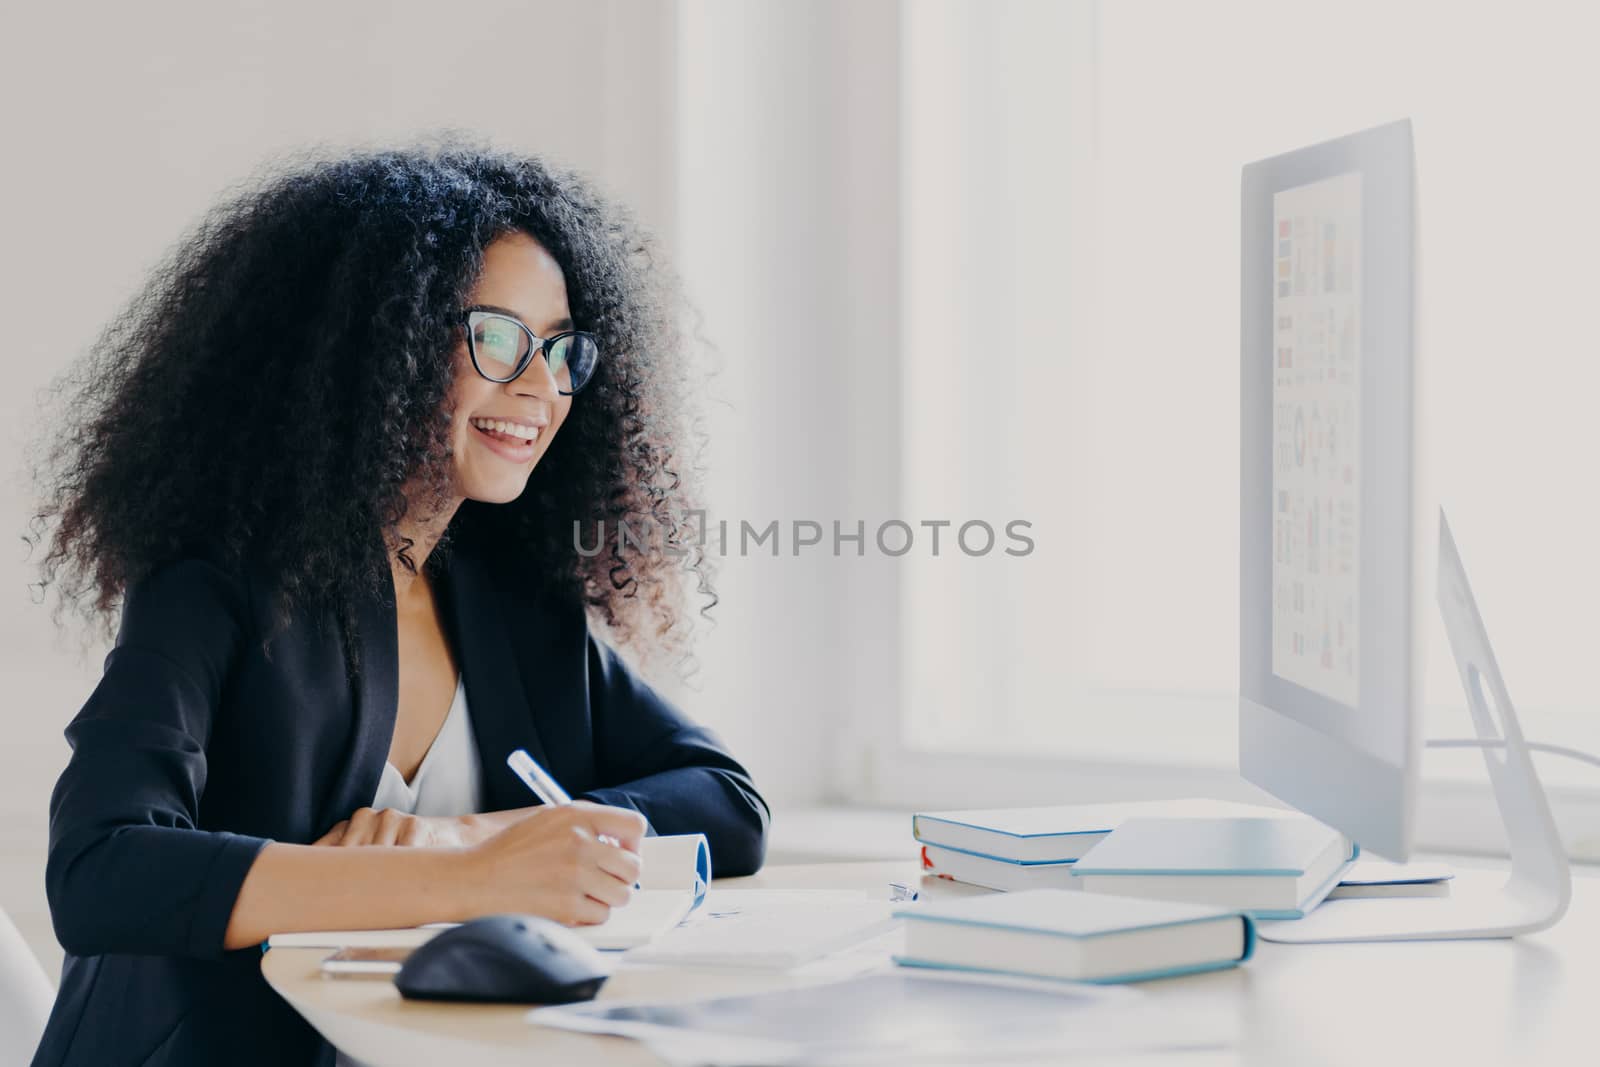 Professional curly haired woman manager makes report, focused into screen, writes down information, wears glasses and formal suit, notes idea for strartup planning, poses in office interior. by vkstock